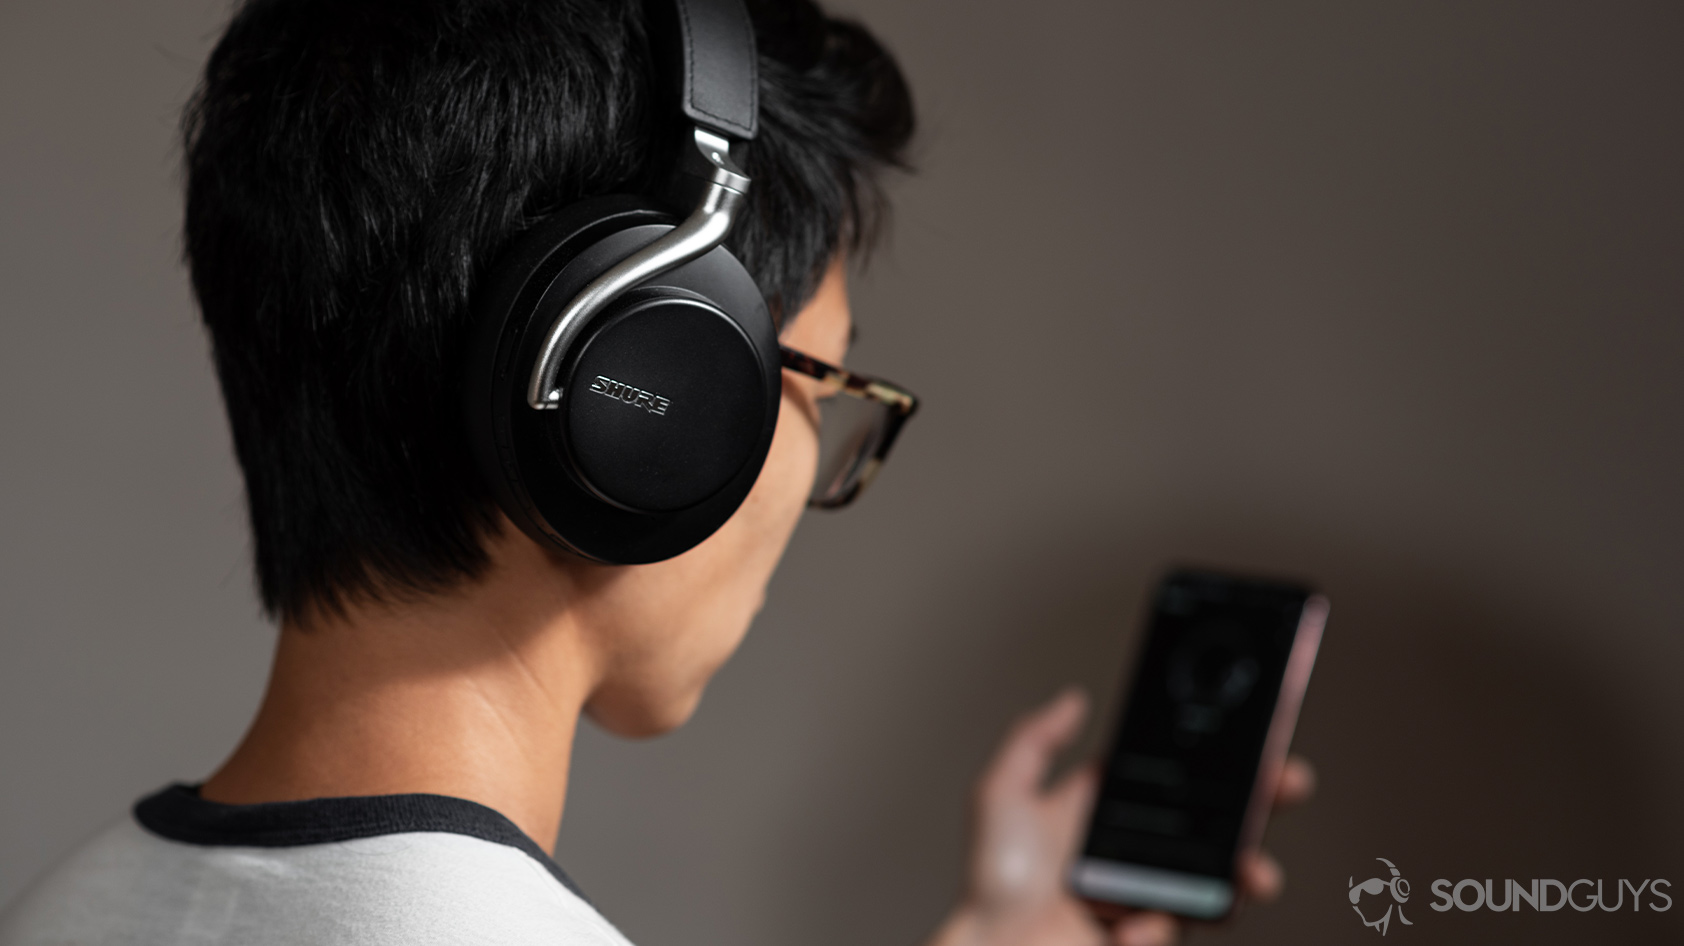 A woman wearing the Shure AONIC 50 noise canceling headphones and using the Shure PlayPlus headphone app.